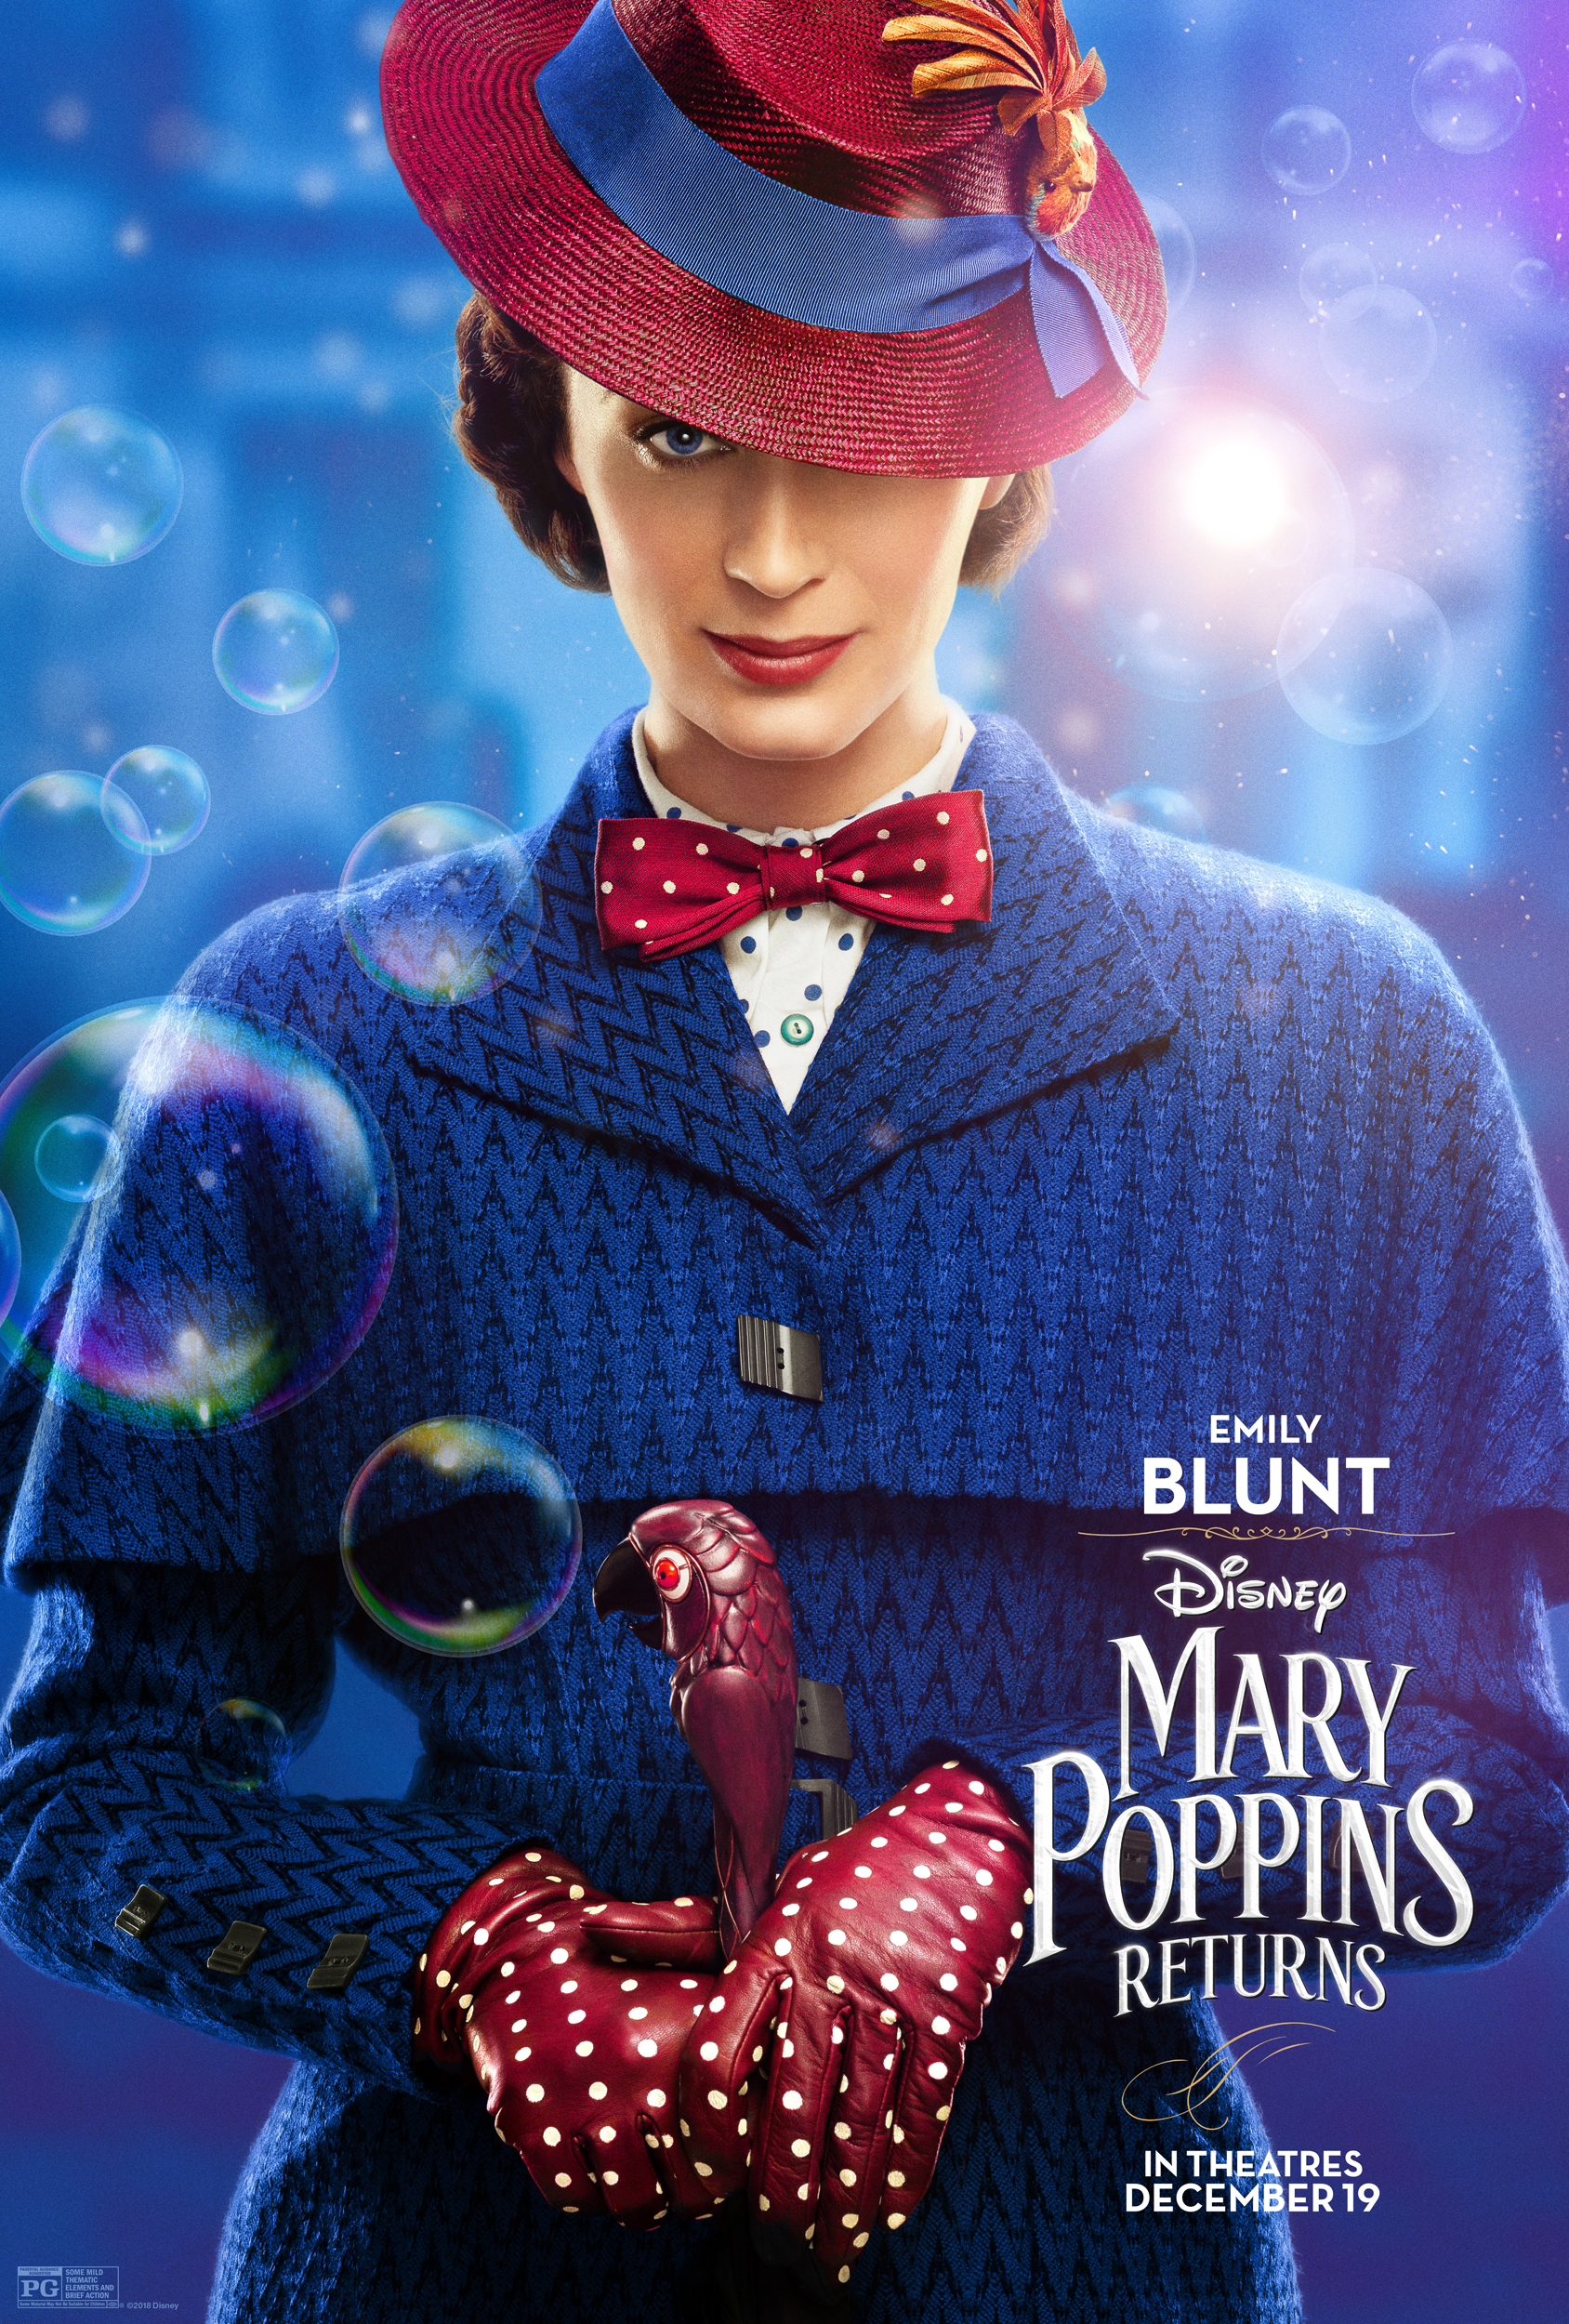 I’m Flying Off To Los Angeles For Disney Mary Poppins Returns Premiere & More!